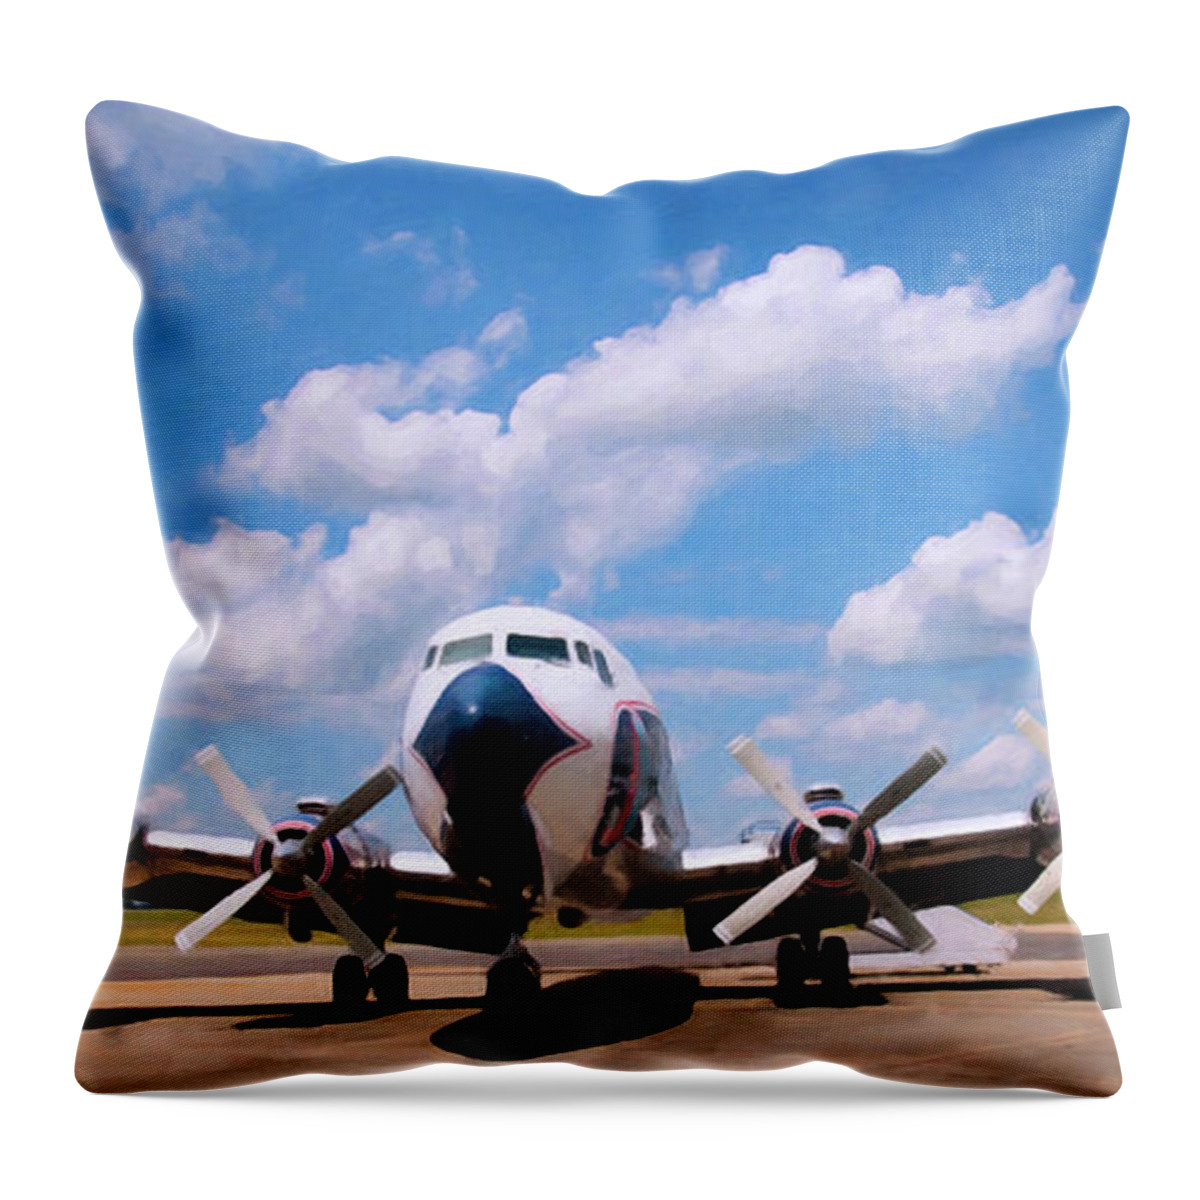 Dc 7 Throw Pillow featuring the digital art Dc 7 by Flees Photos